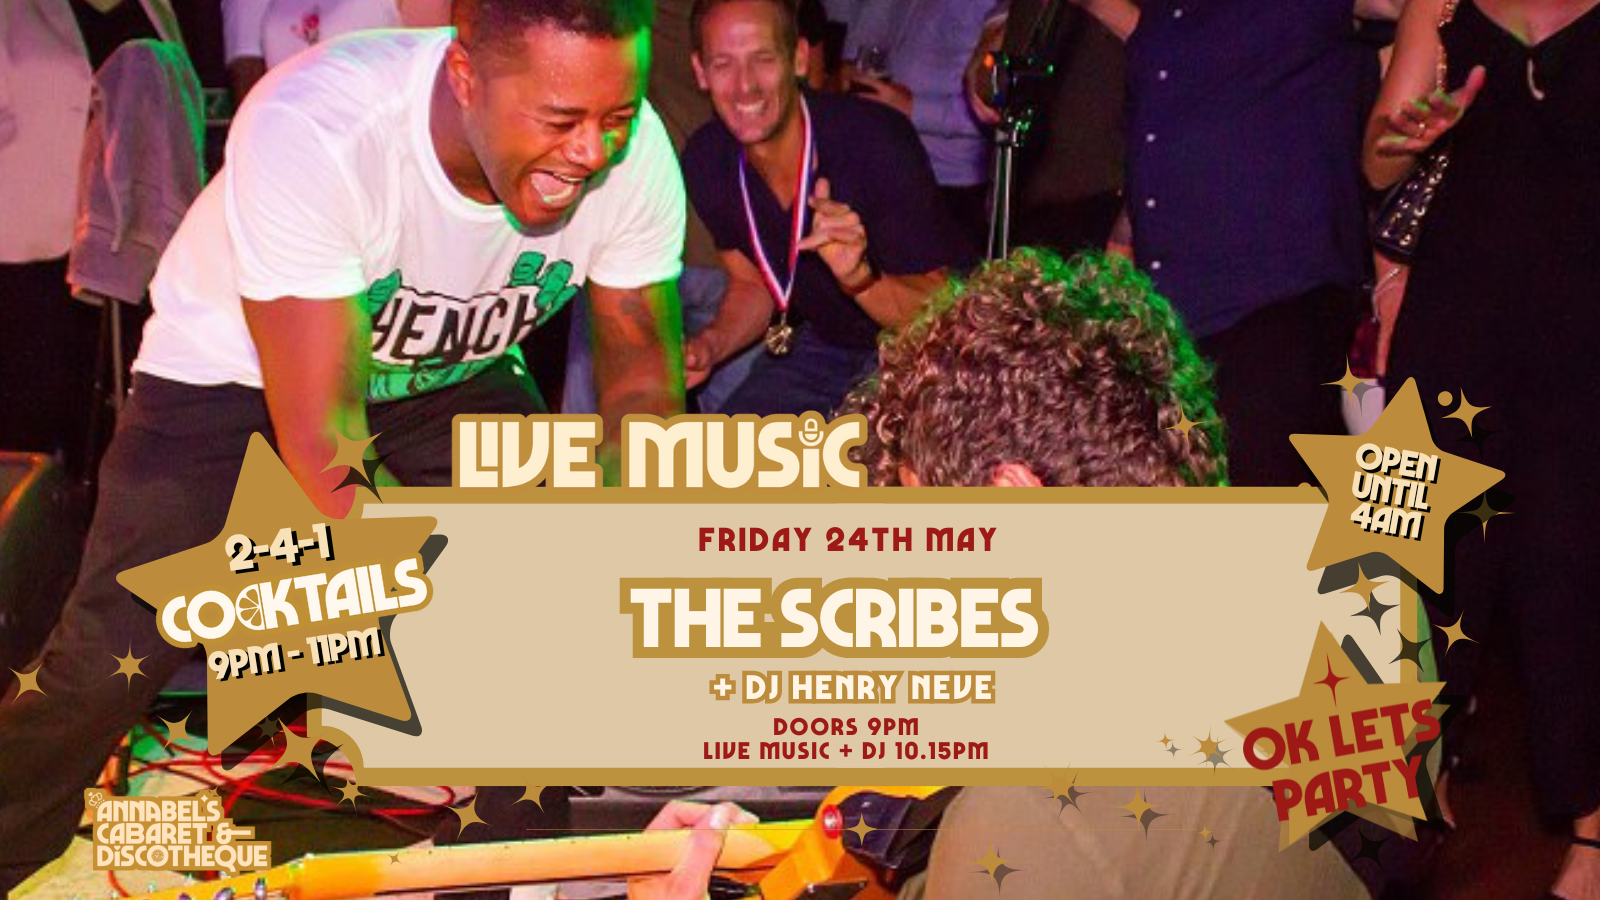 Live Music: THE SCRIBES // Annabel’s Cabaret & Discotheque  Event Time